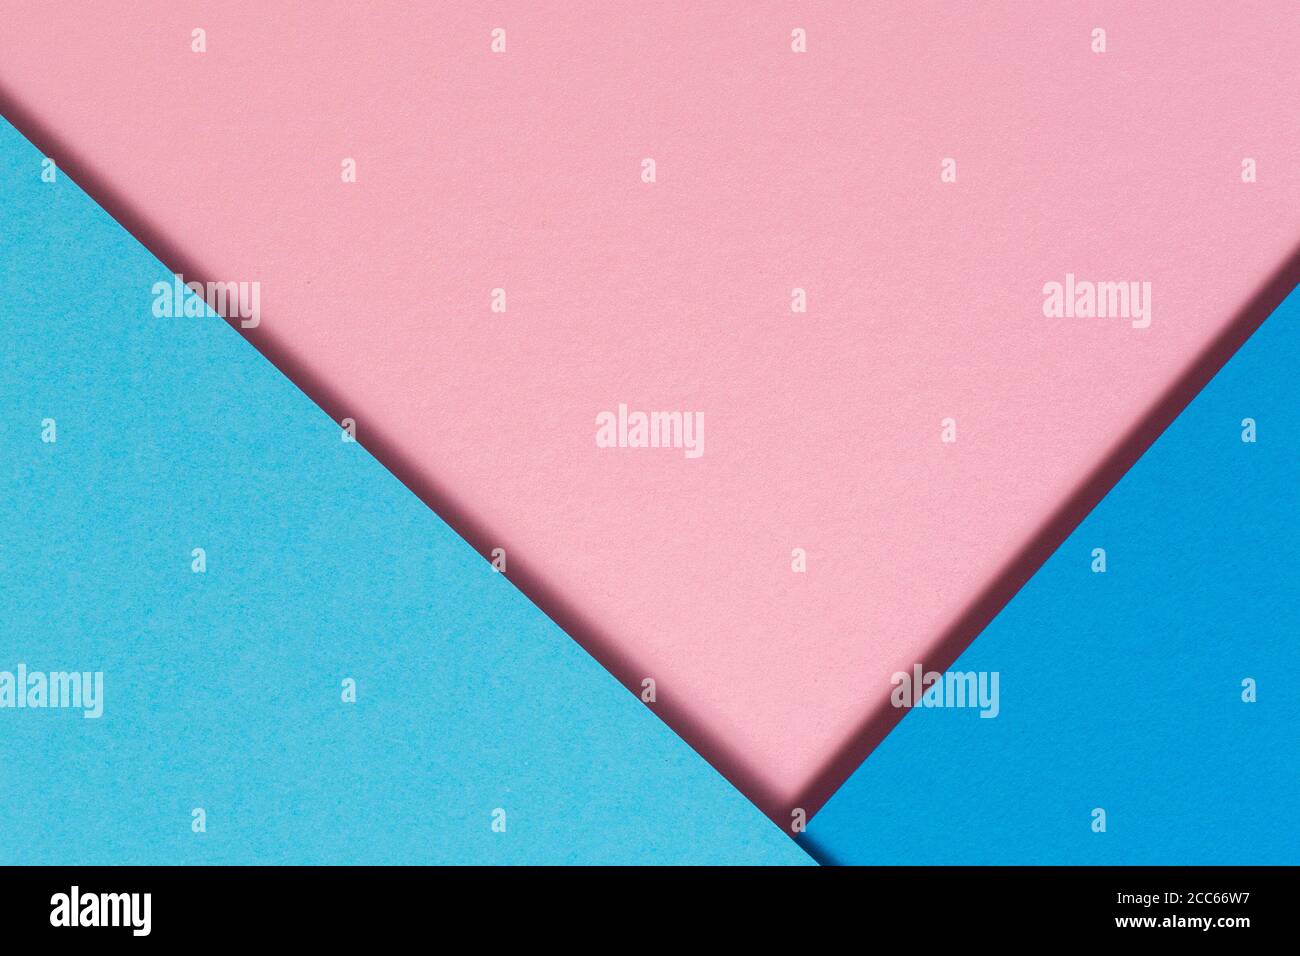 Abstract color papers geometry flat lay composition background with blue and pink color tones Stock Photo